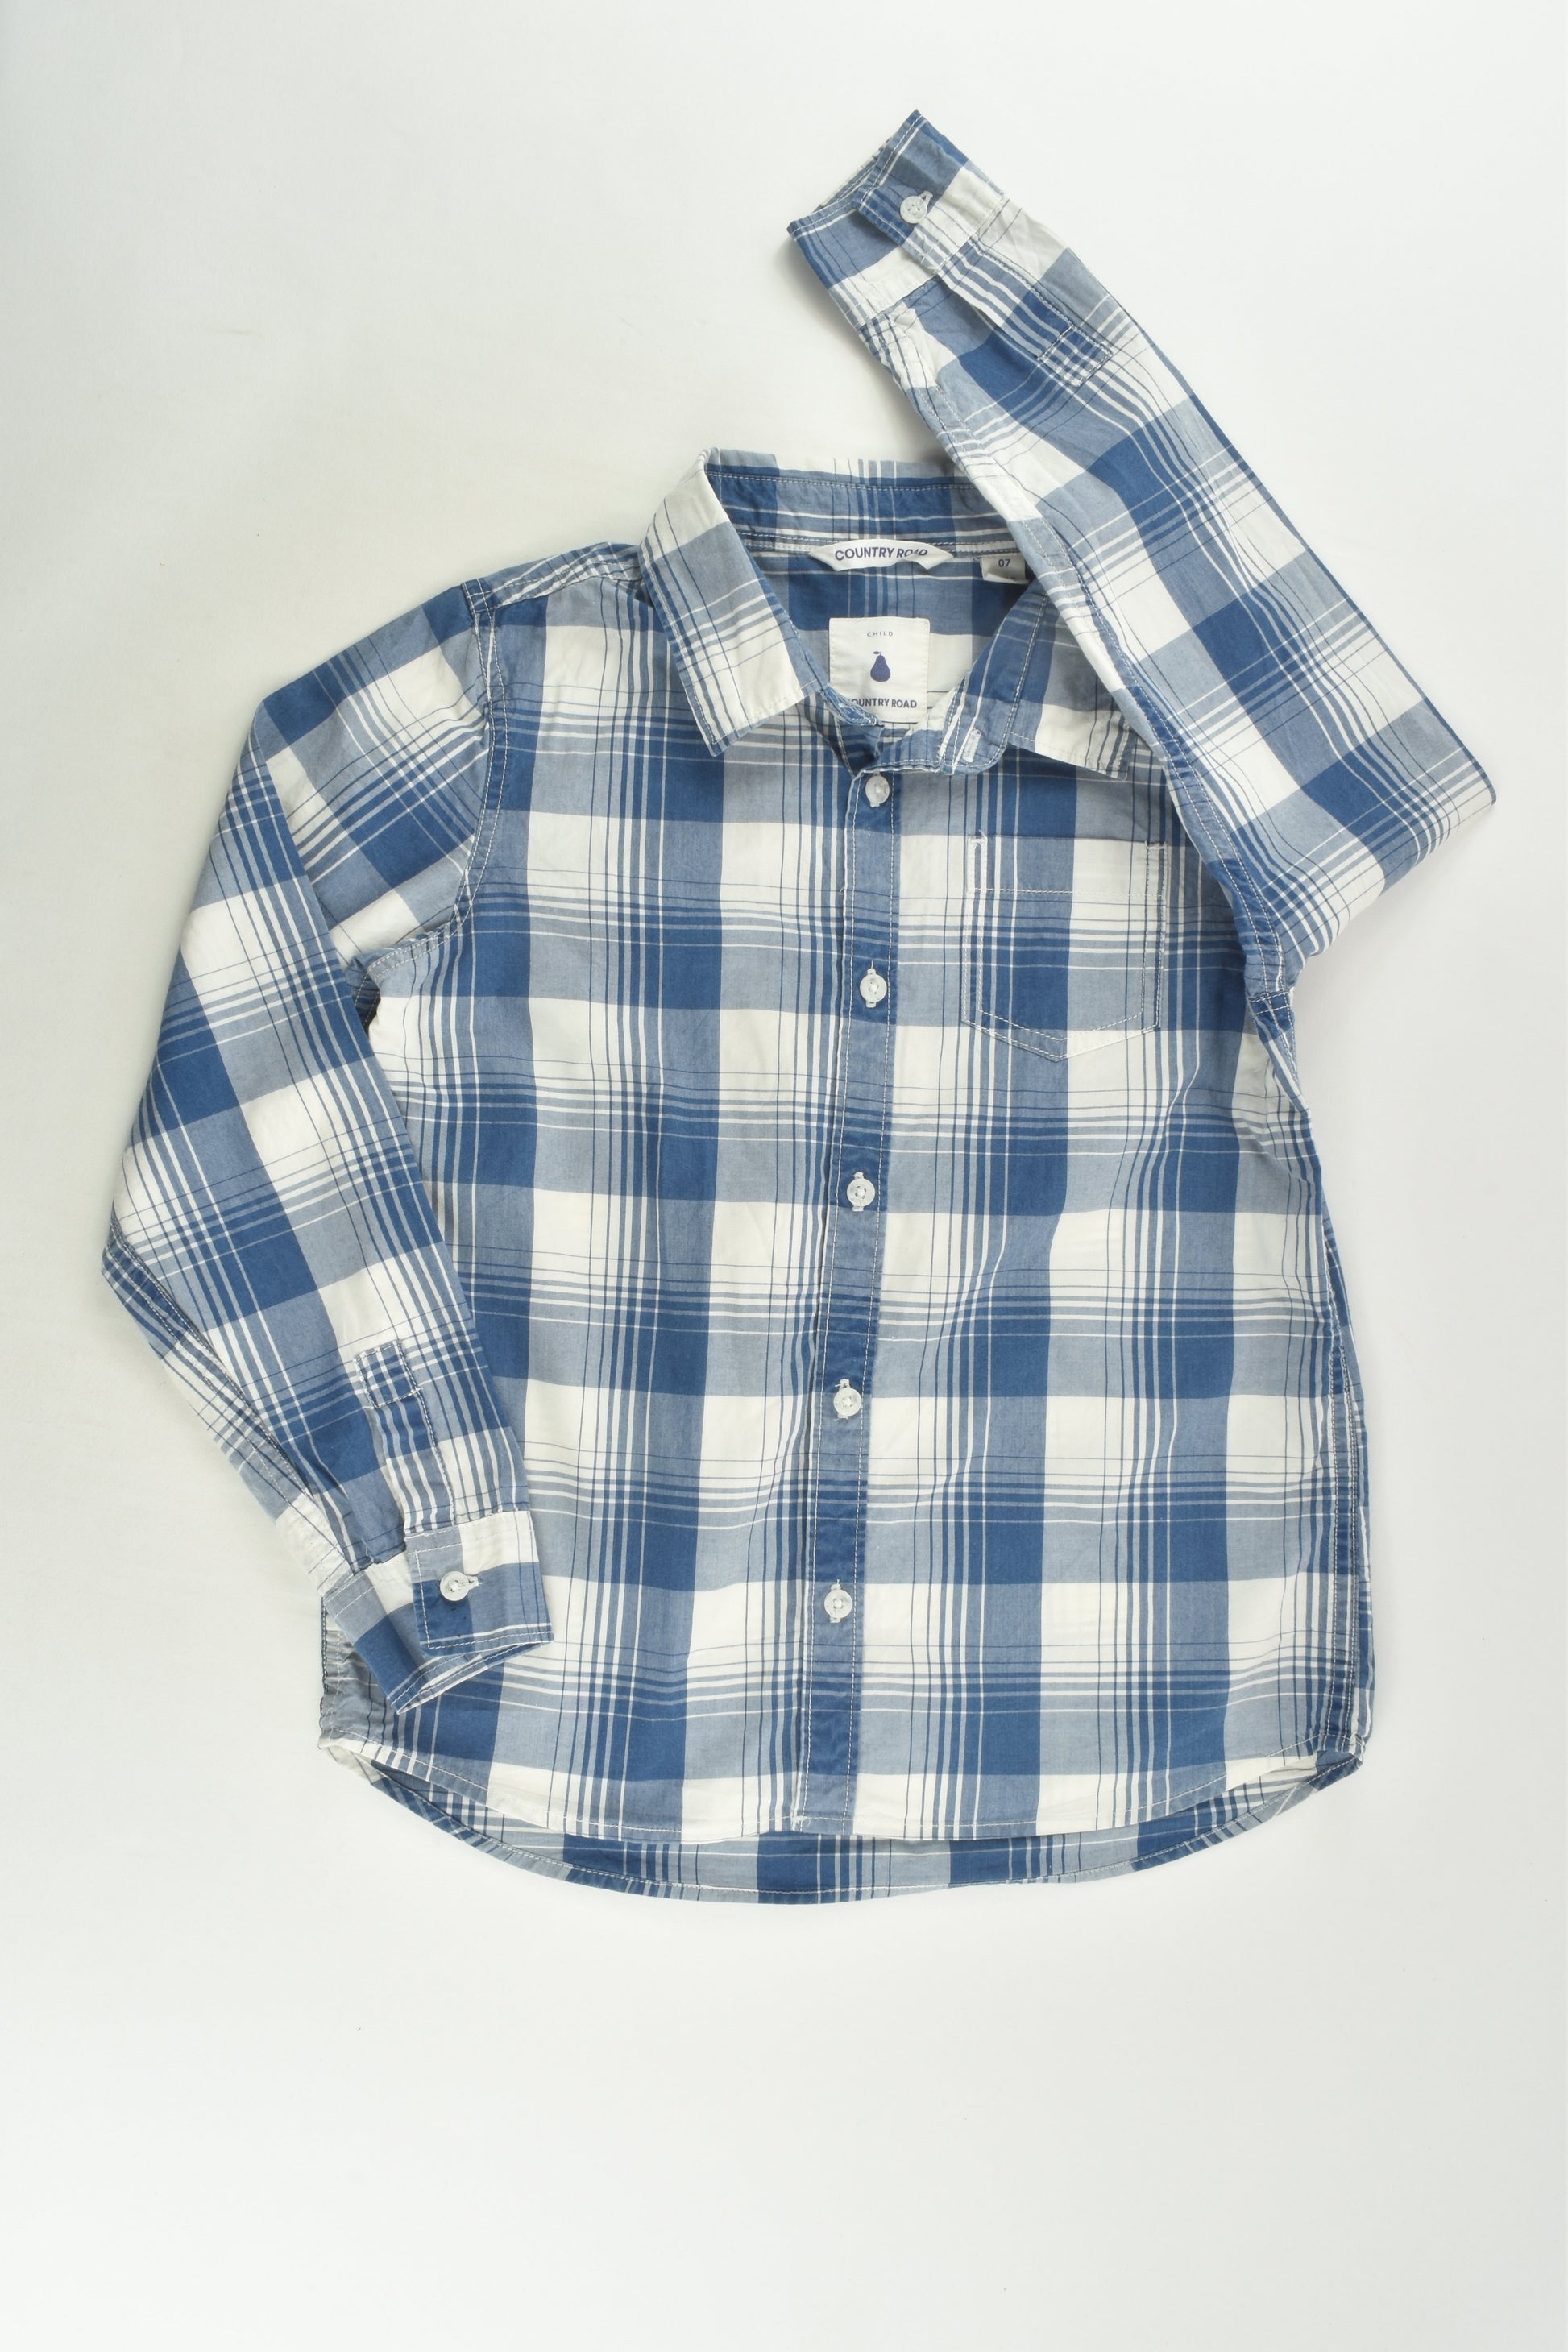 Country Road Size 7 Checked Shirt